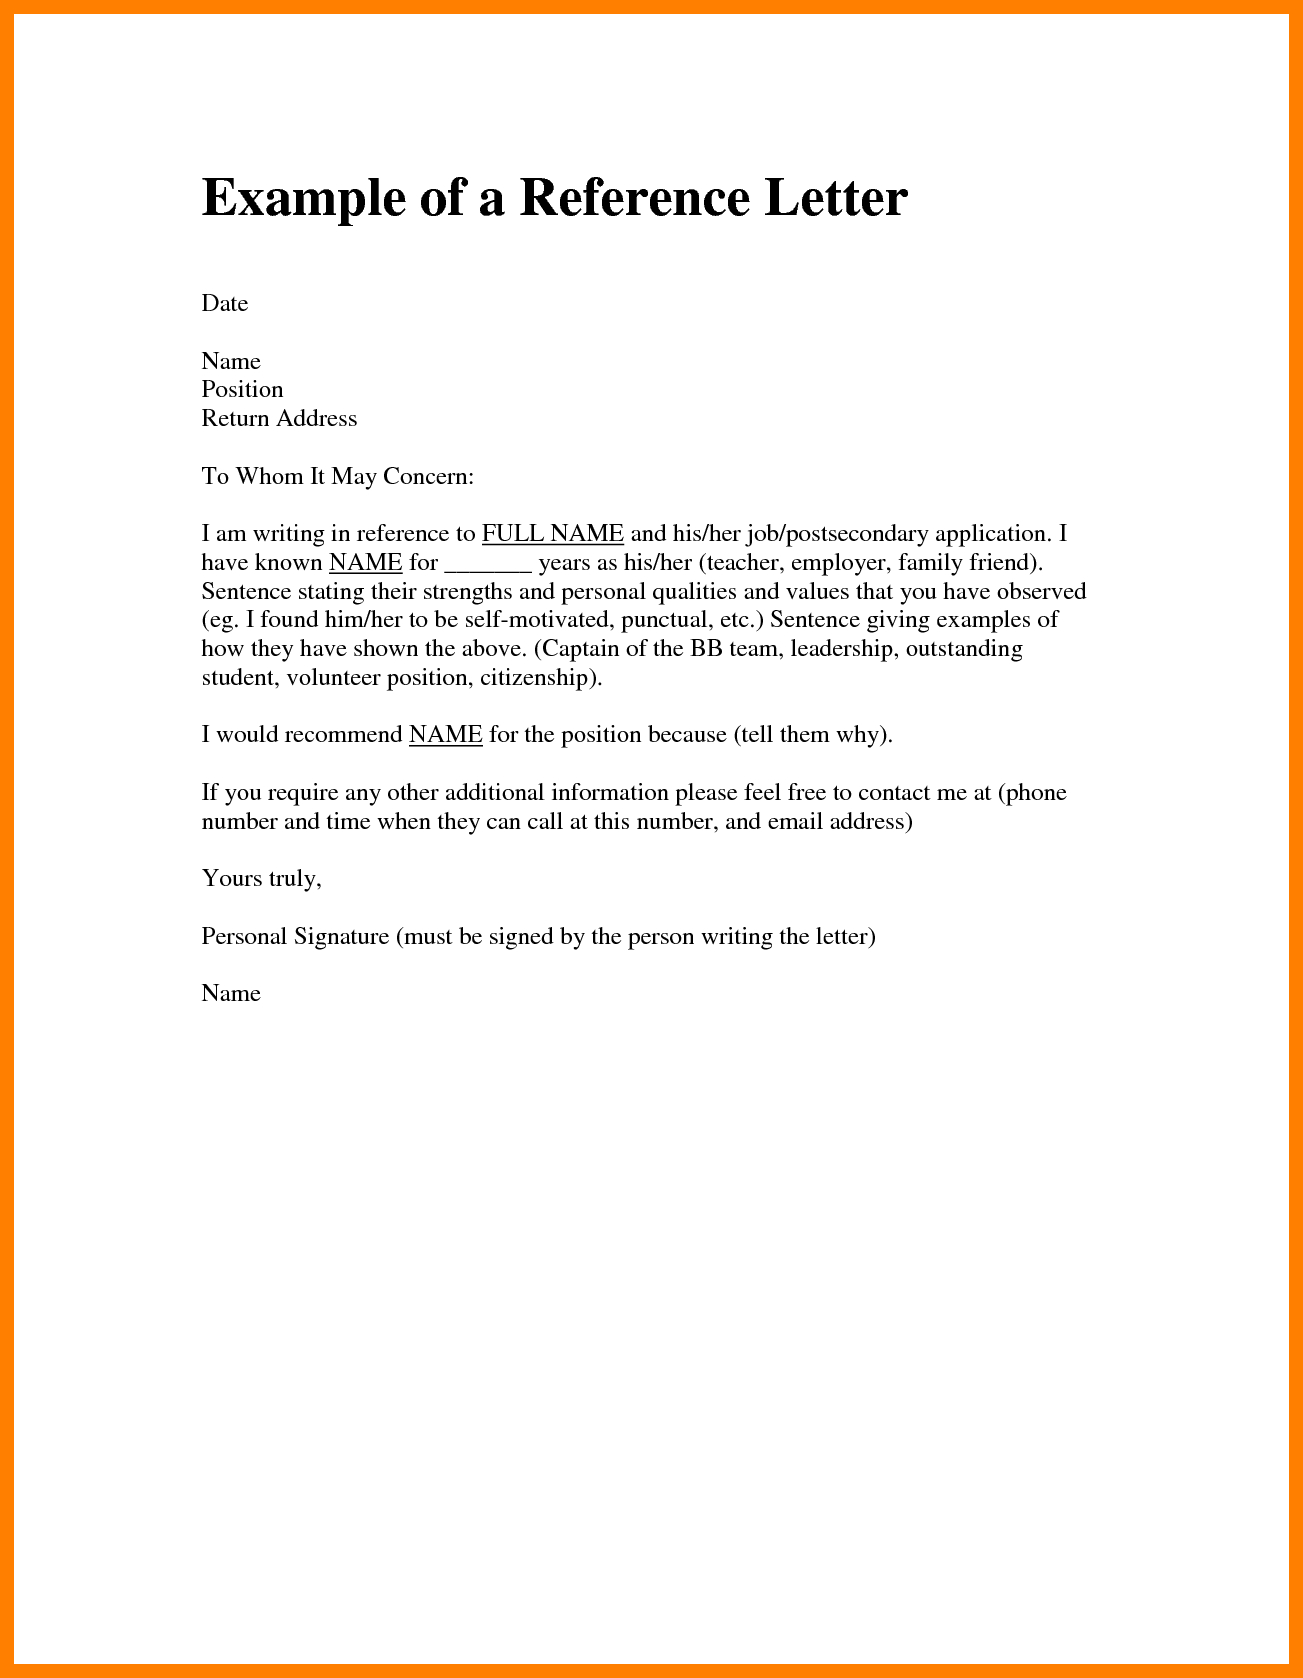 Sample Character Reference Letter For A Friend Debandje within proportions 1303 X 1678